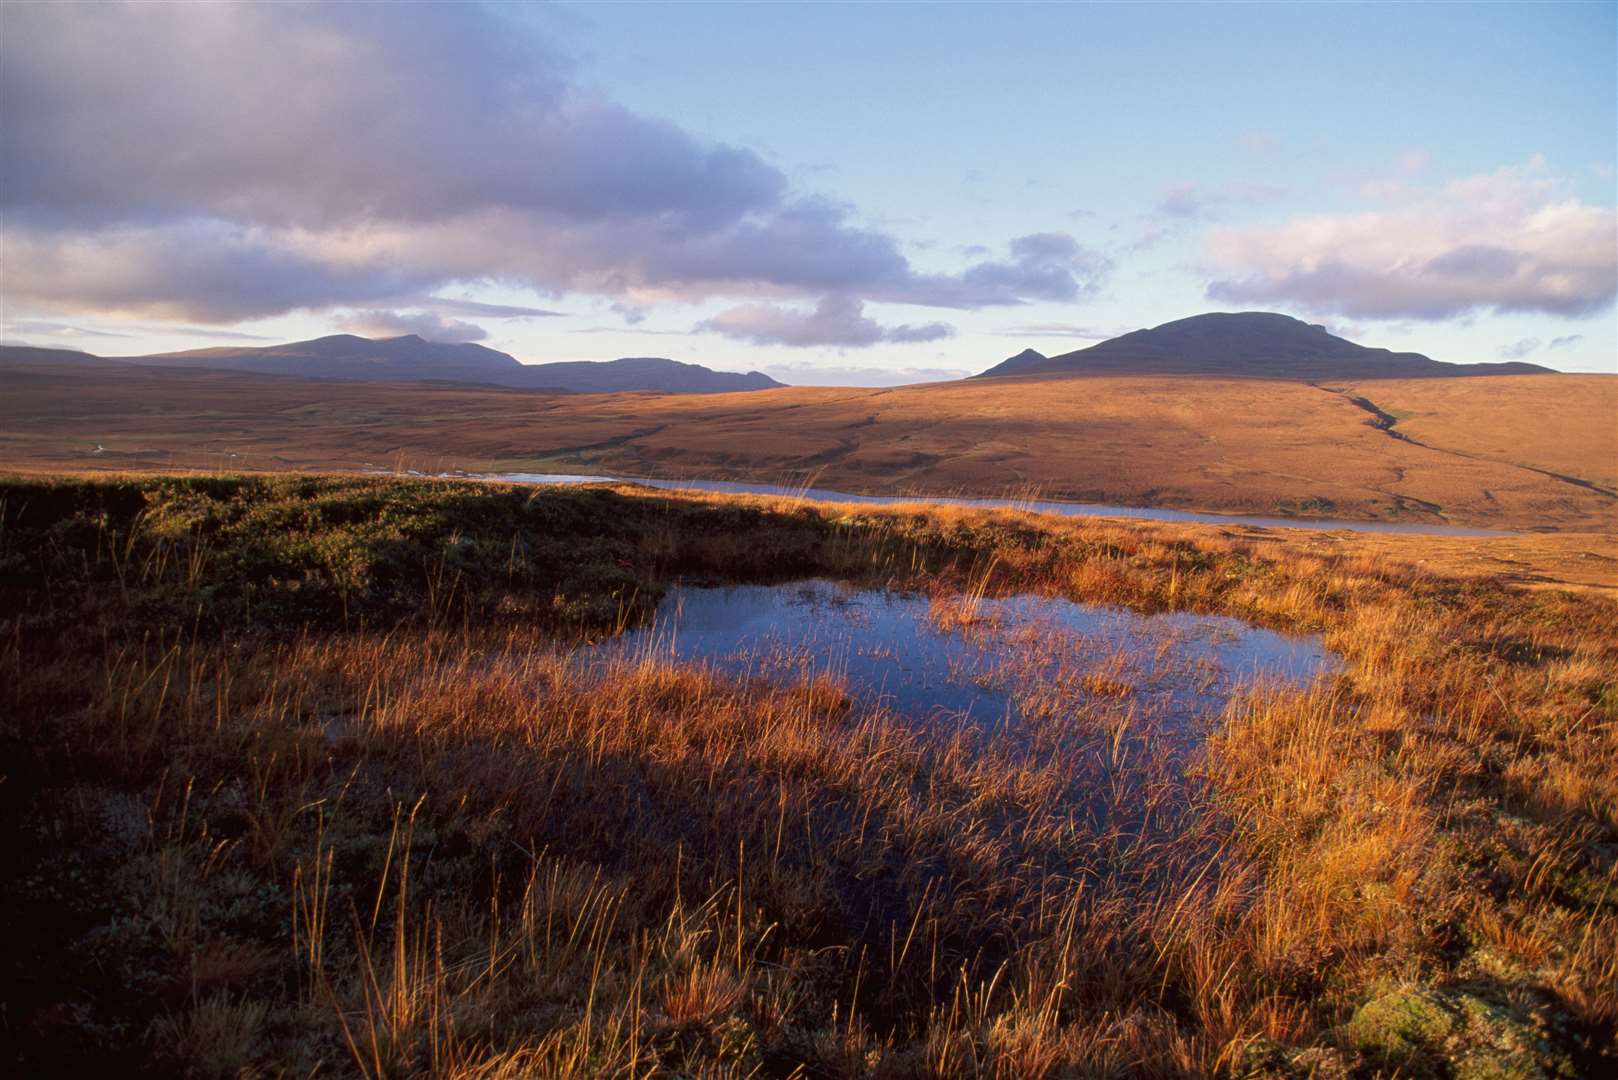 The research hub aims to establish the Flow Country as a UK focal point of peatland science.